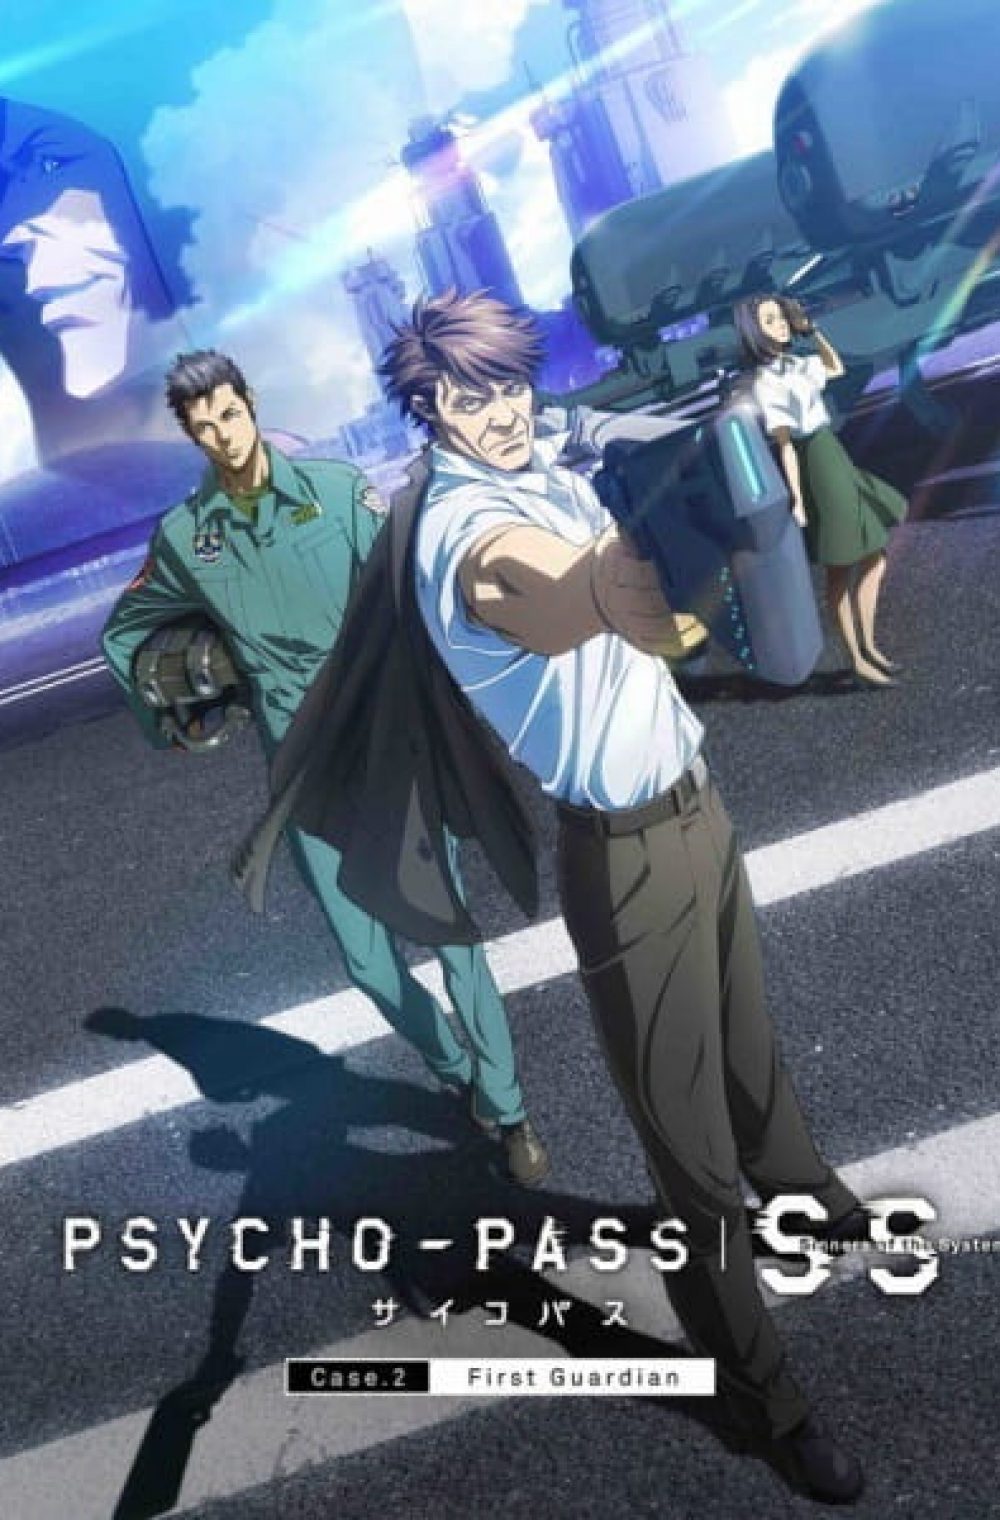 Psycho-Pass: Sinners of the System Case 2 – First Guardian